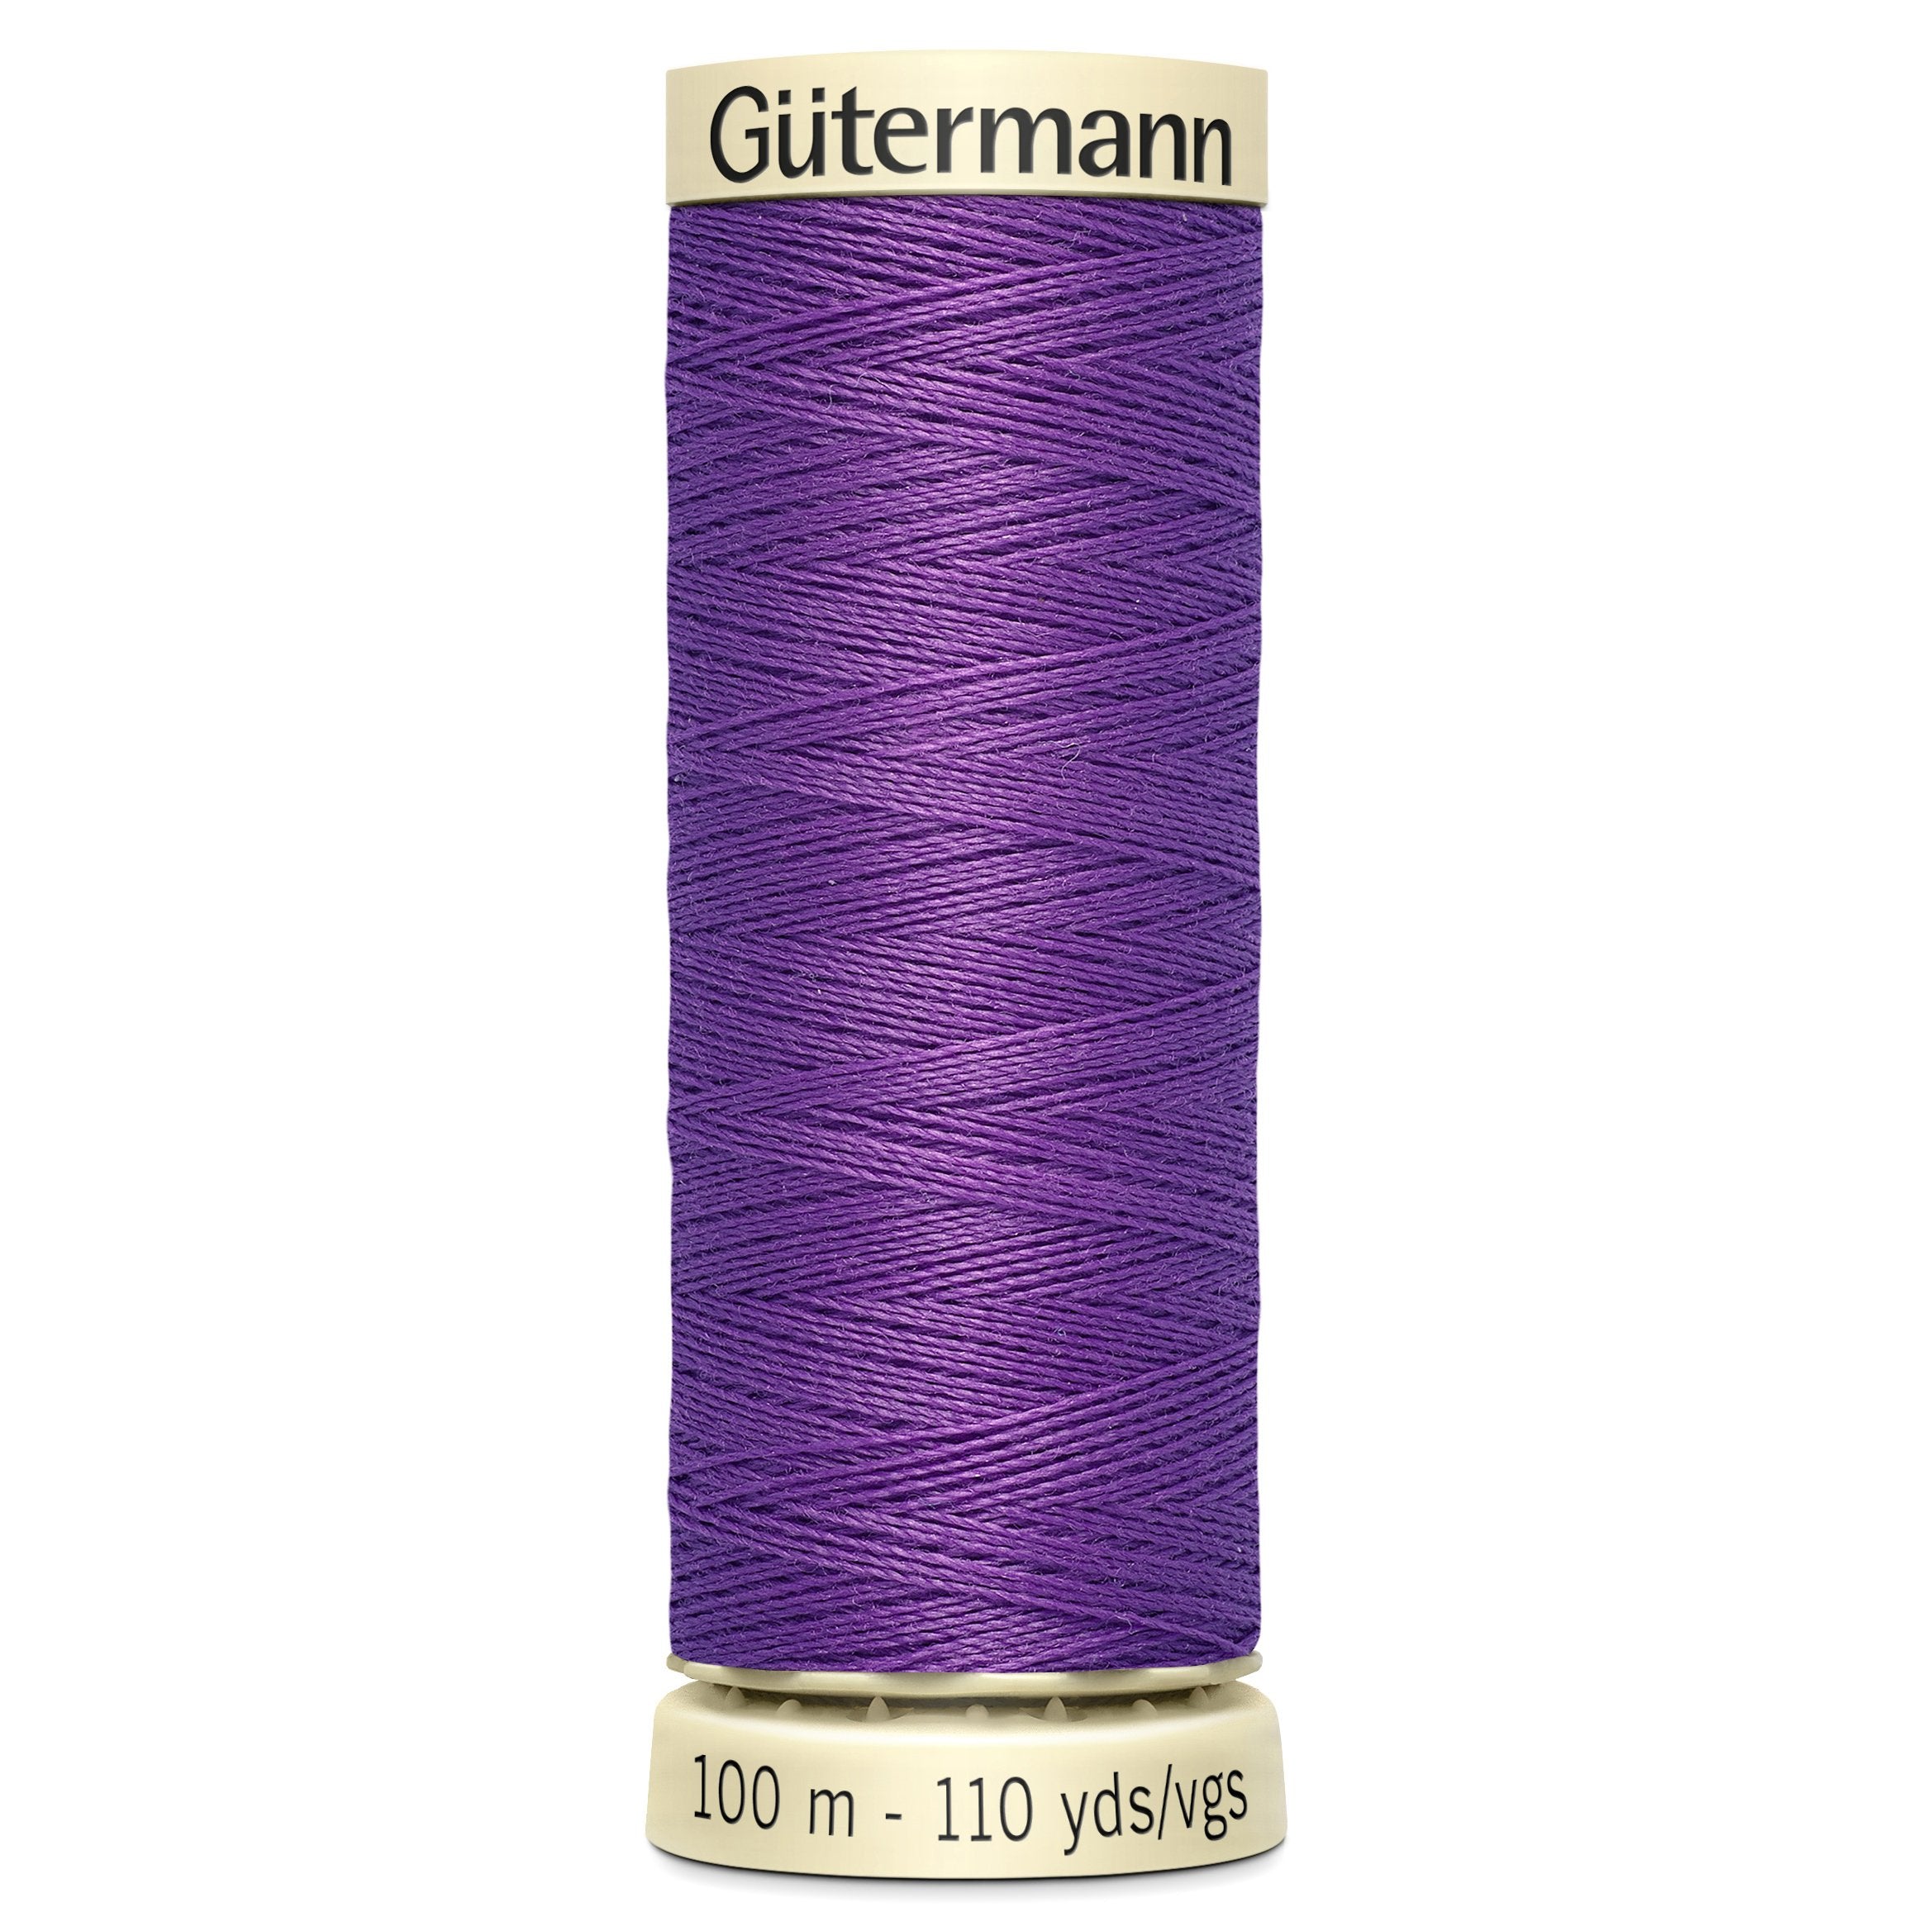 Gutermann Sew All Thread colour 571 Purple from Jaycotts Sewing Supplies